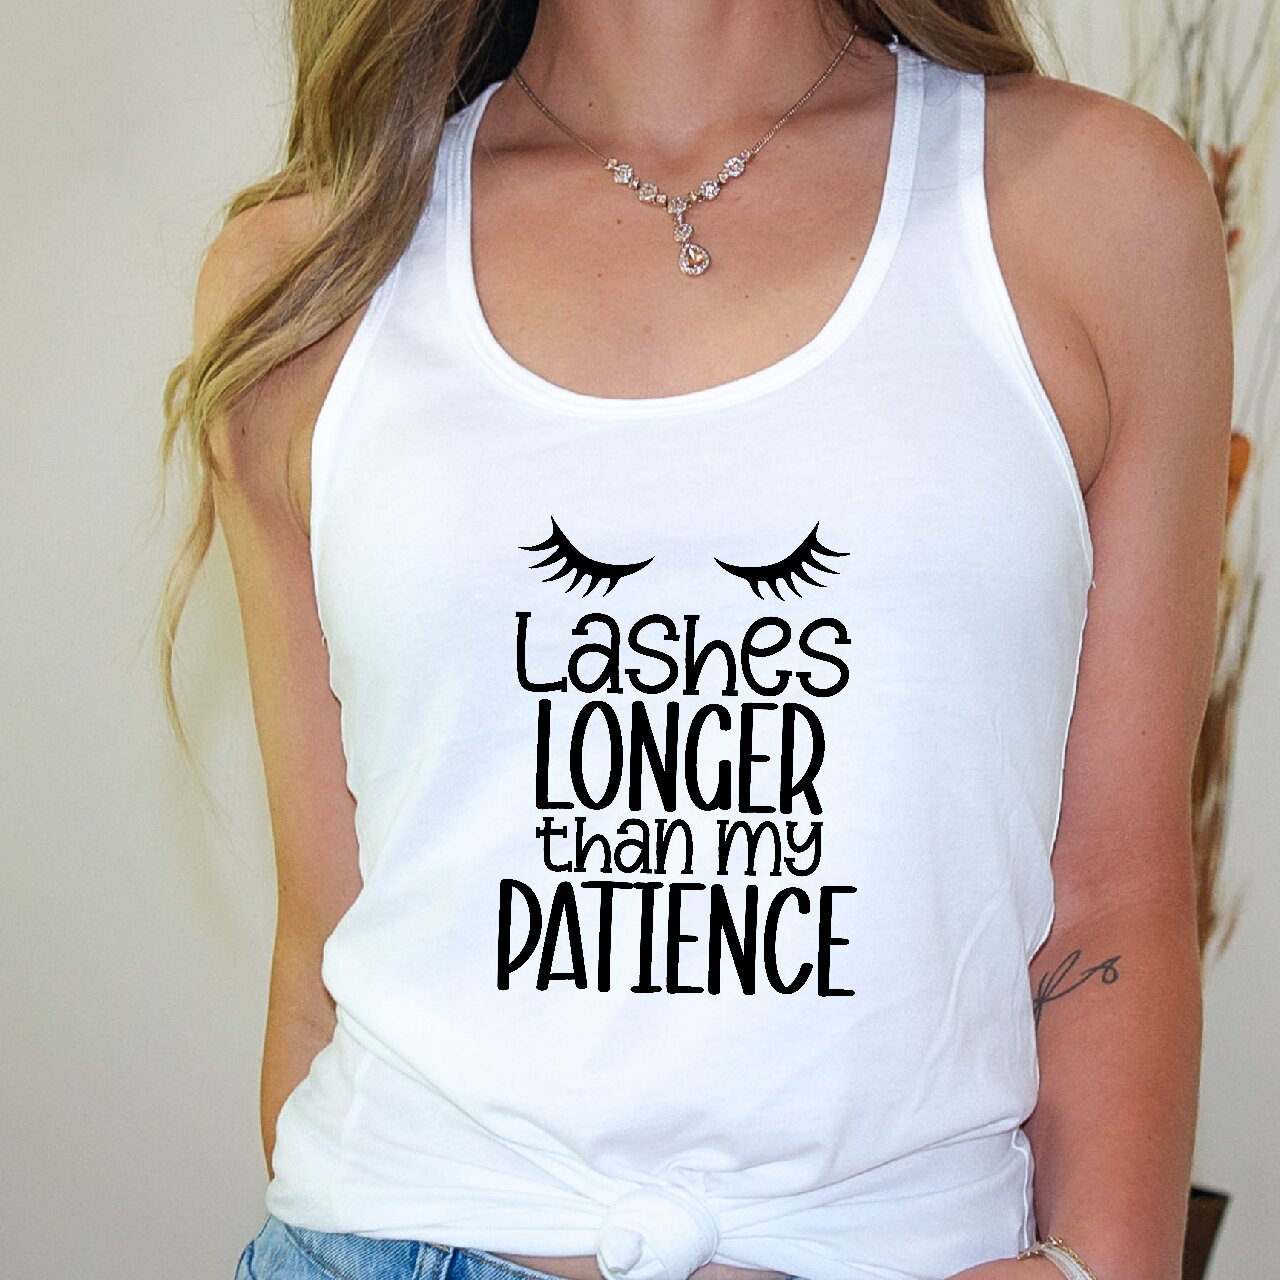 Lashes Longer Than My Patience - Tank Top